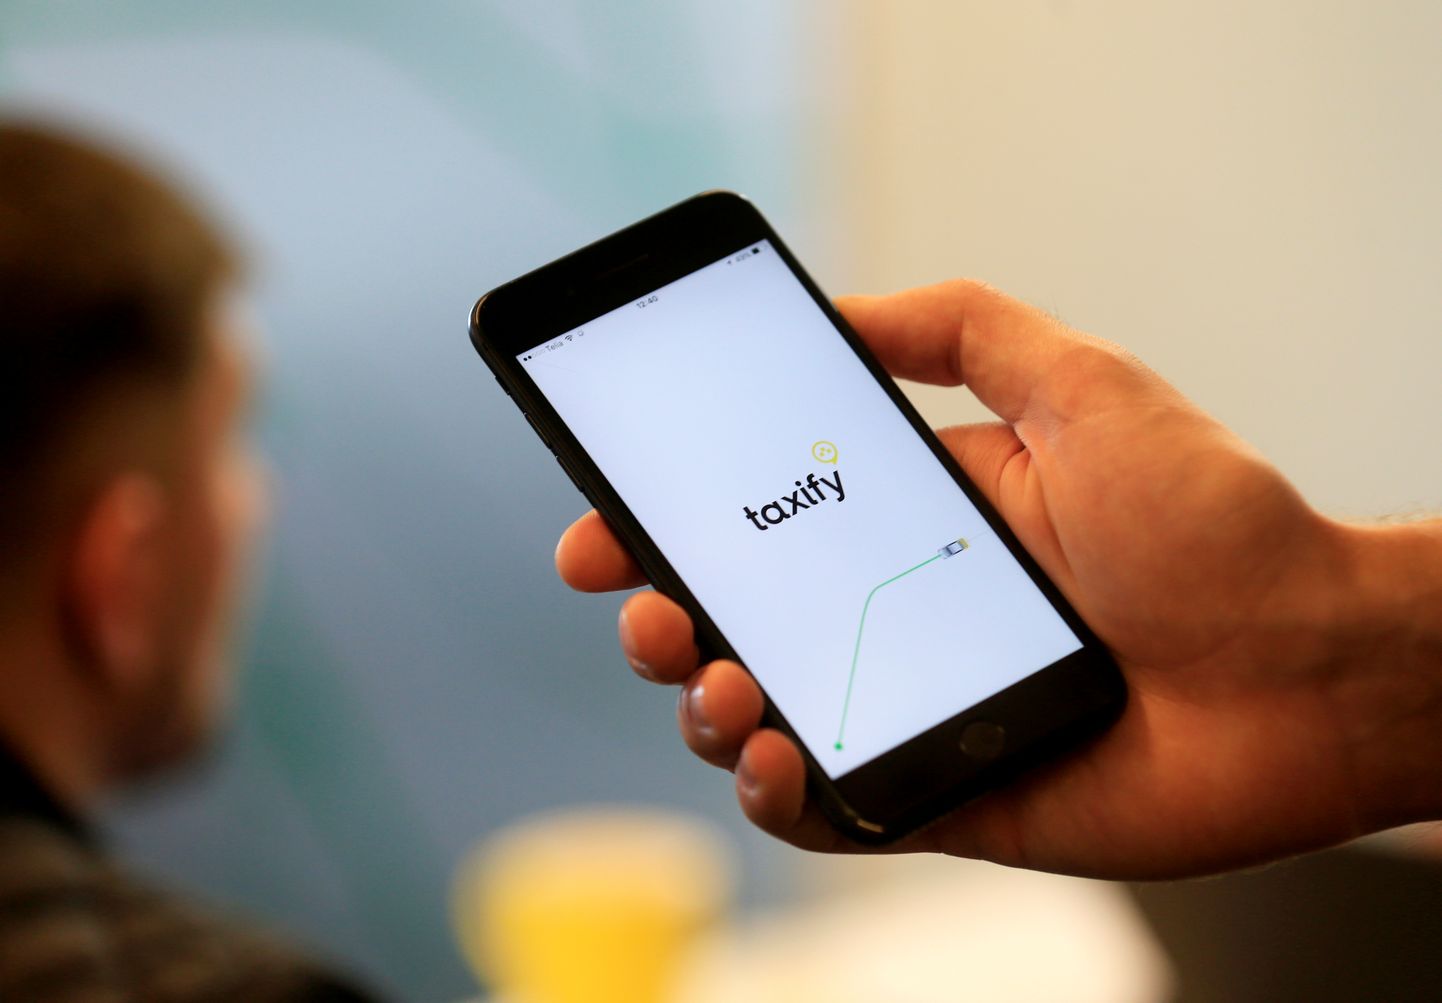 Taxify CEO Markus Villig shows a smartphone app at company's headquarters in Tallinn, Estonia, June 13, 2017. Picture taken June 13, 2017. REUTERS/Ints Kalnins